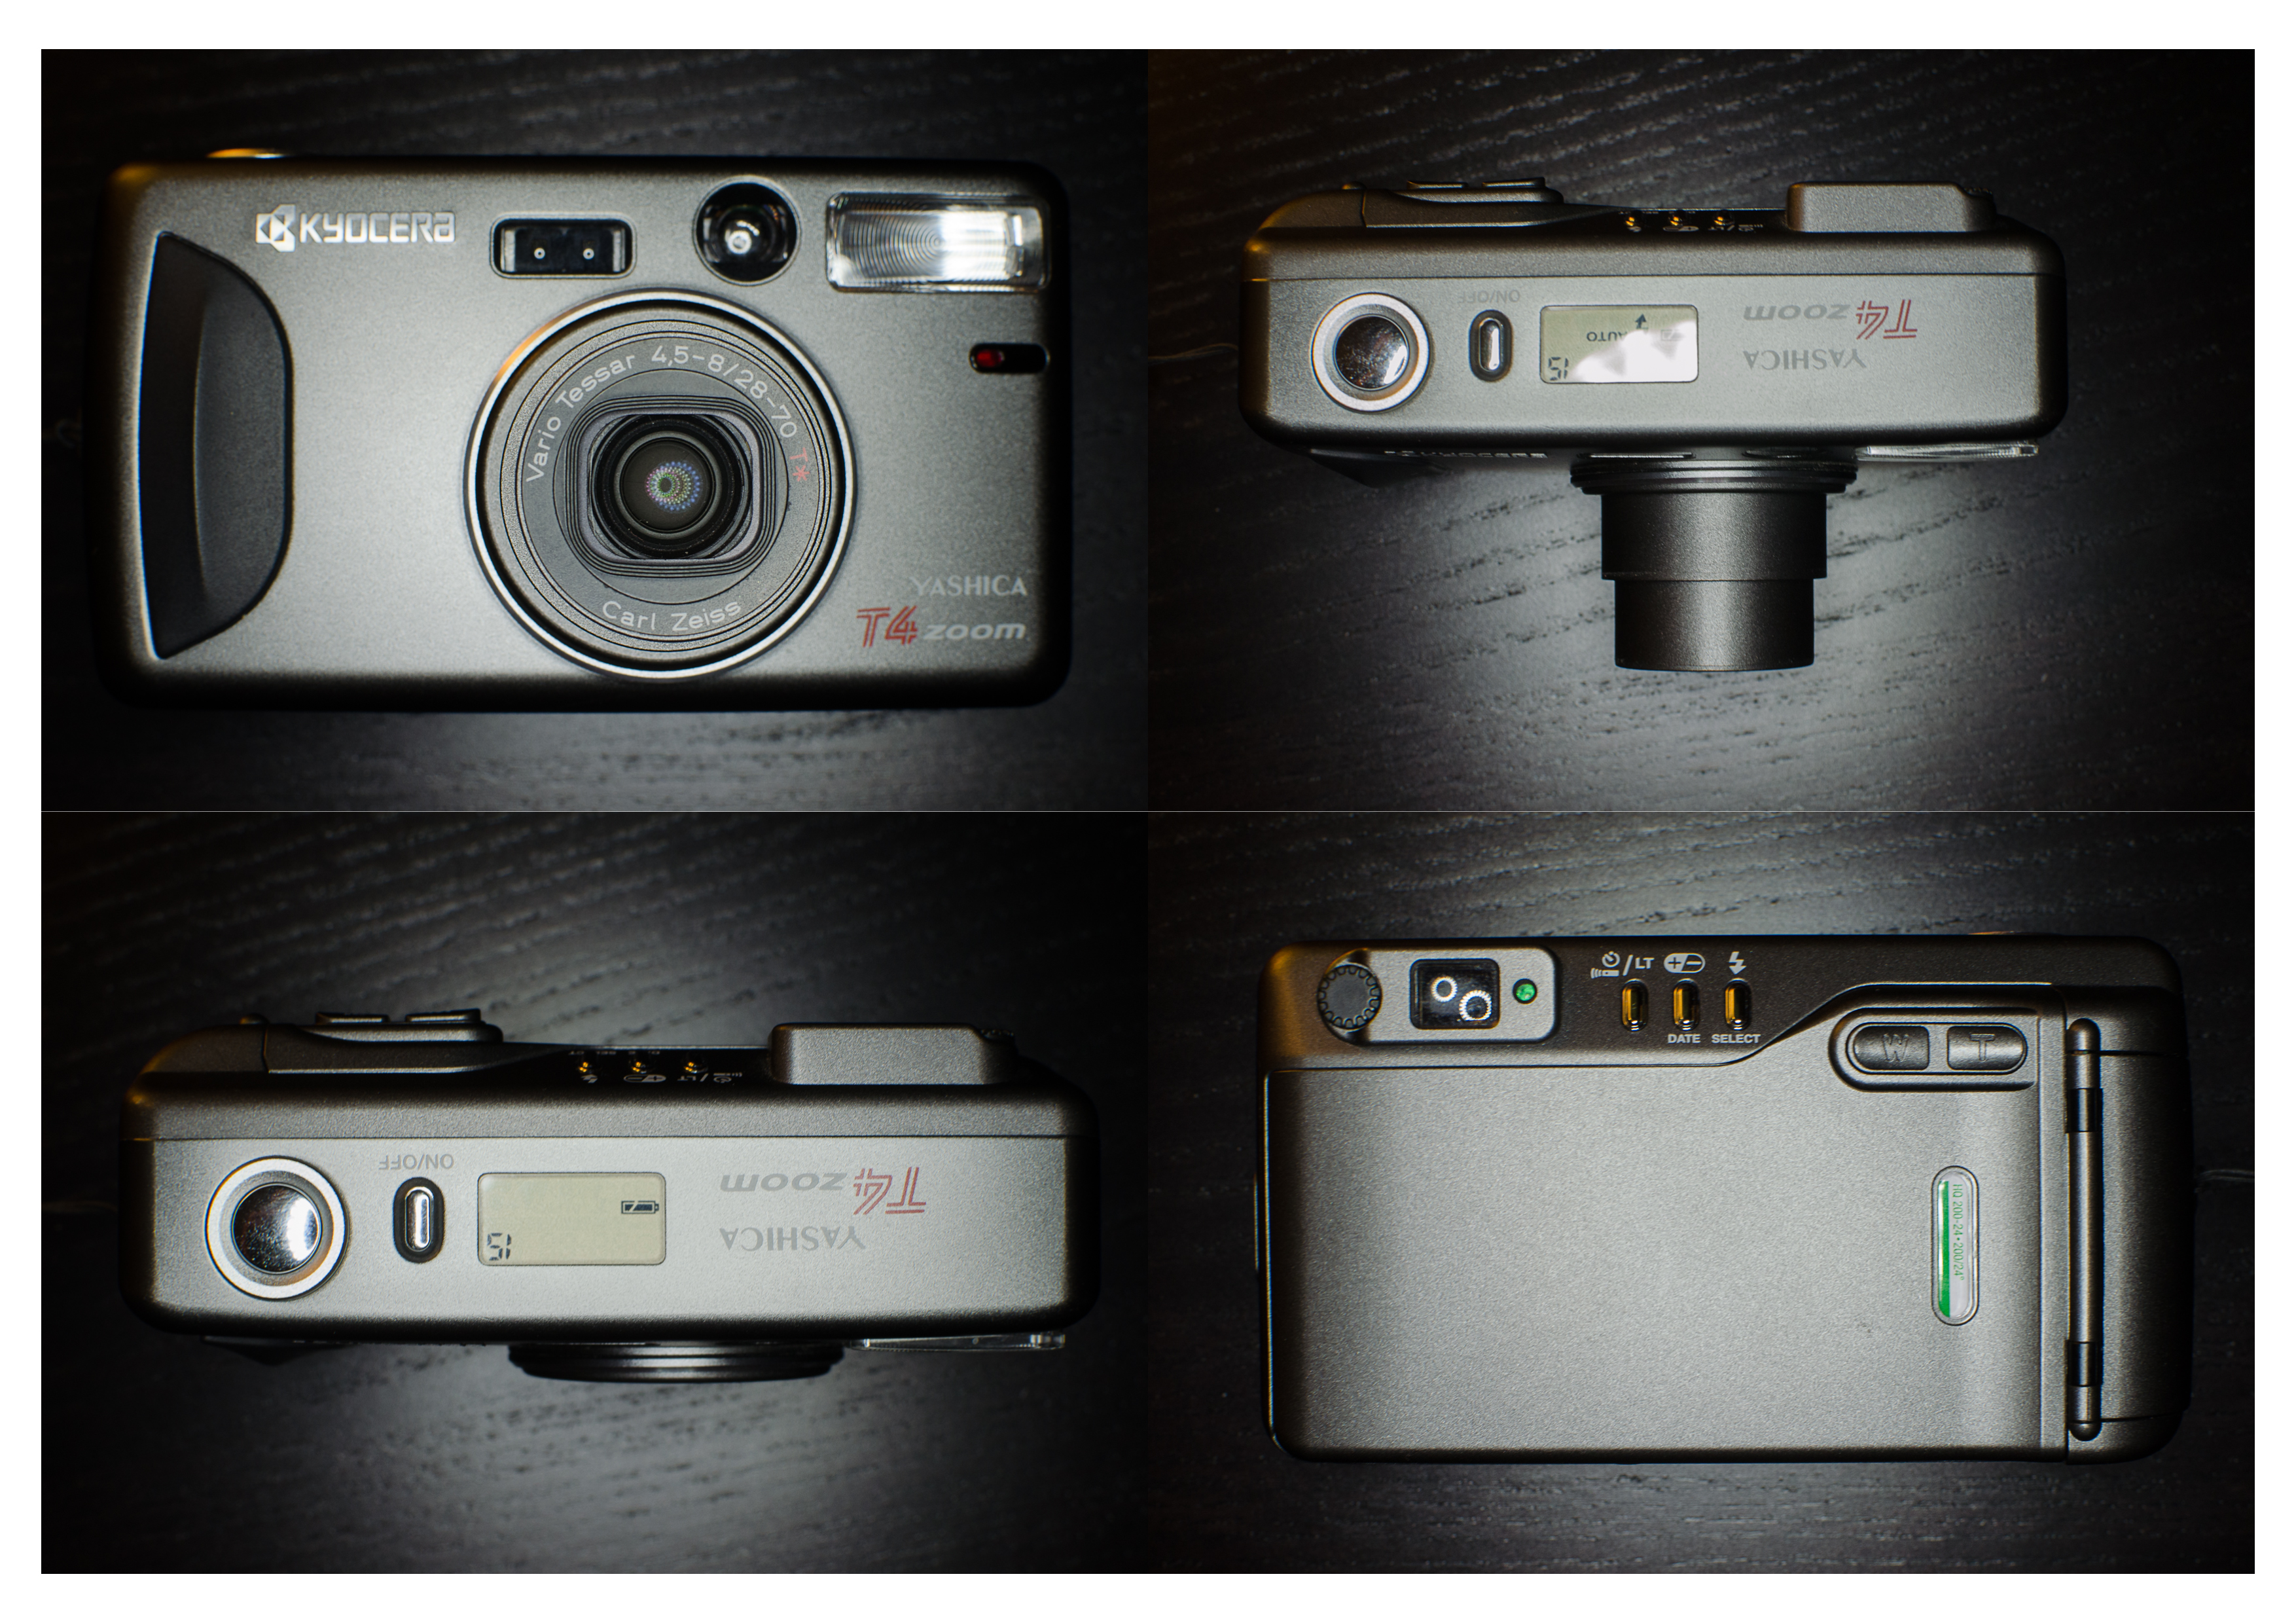 Yashica T4 Zoom | Snap and Tell